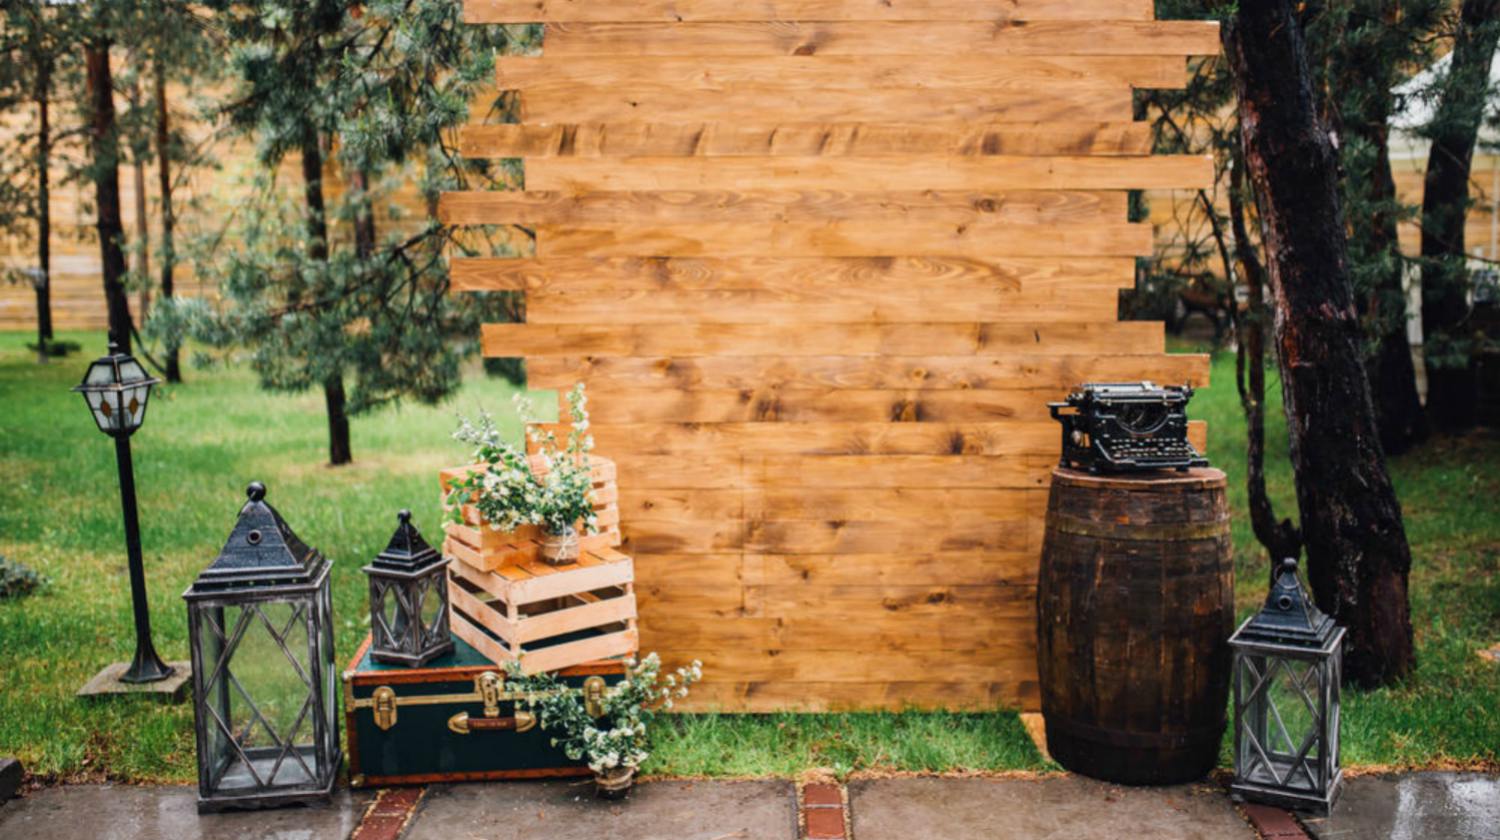 Feature | Rustic Theme Backdrop | DIY Photo Booth Ideas For Your Next Shindig